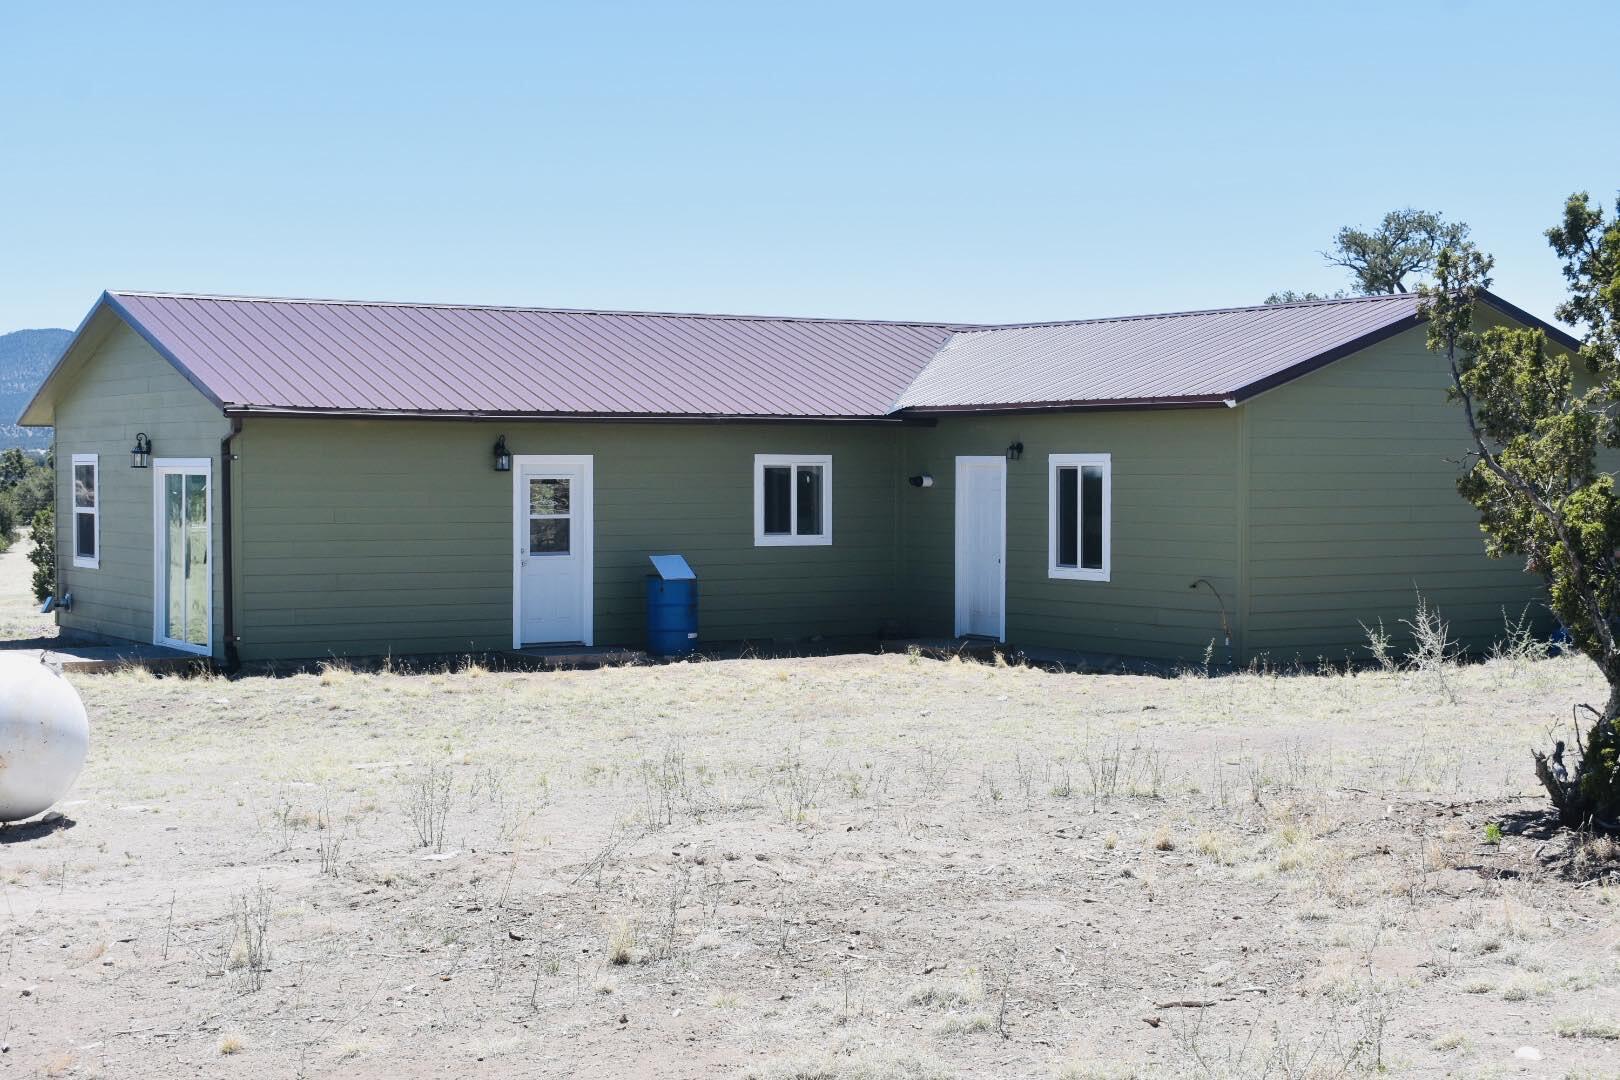 49 Windmill Road, Datil, New Mexico 87821, 2 Bedrooms Bedrooms, ,2 BathroomsBathrooms,Residential,For Sale,49 Windmill Road,1062001